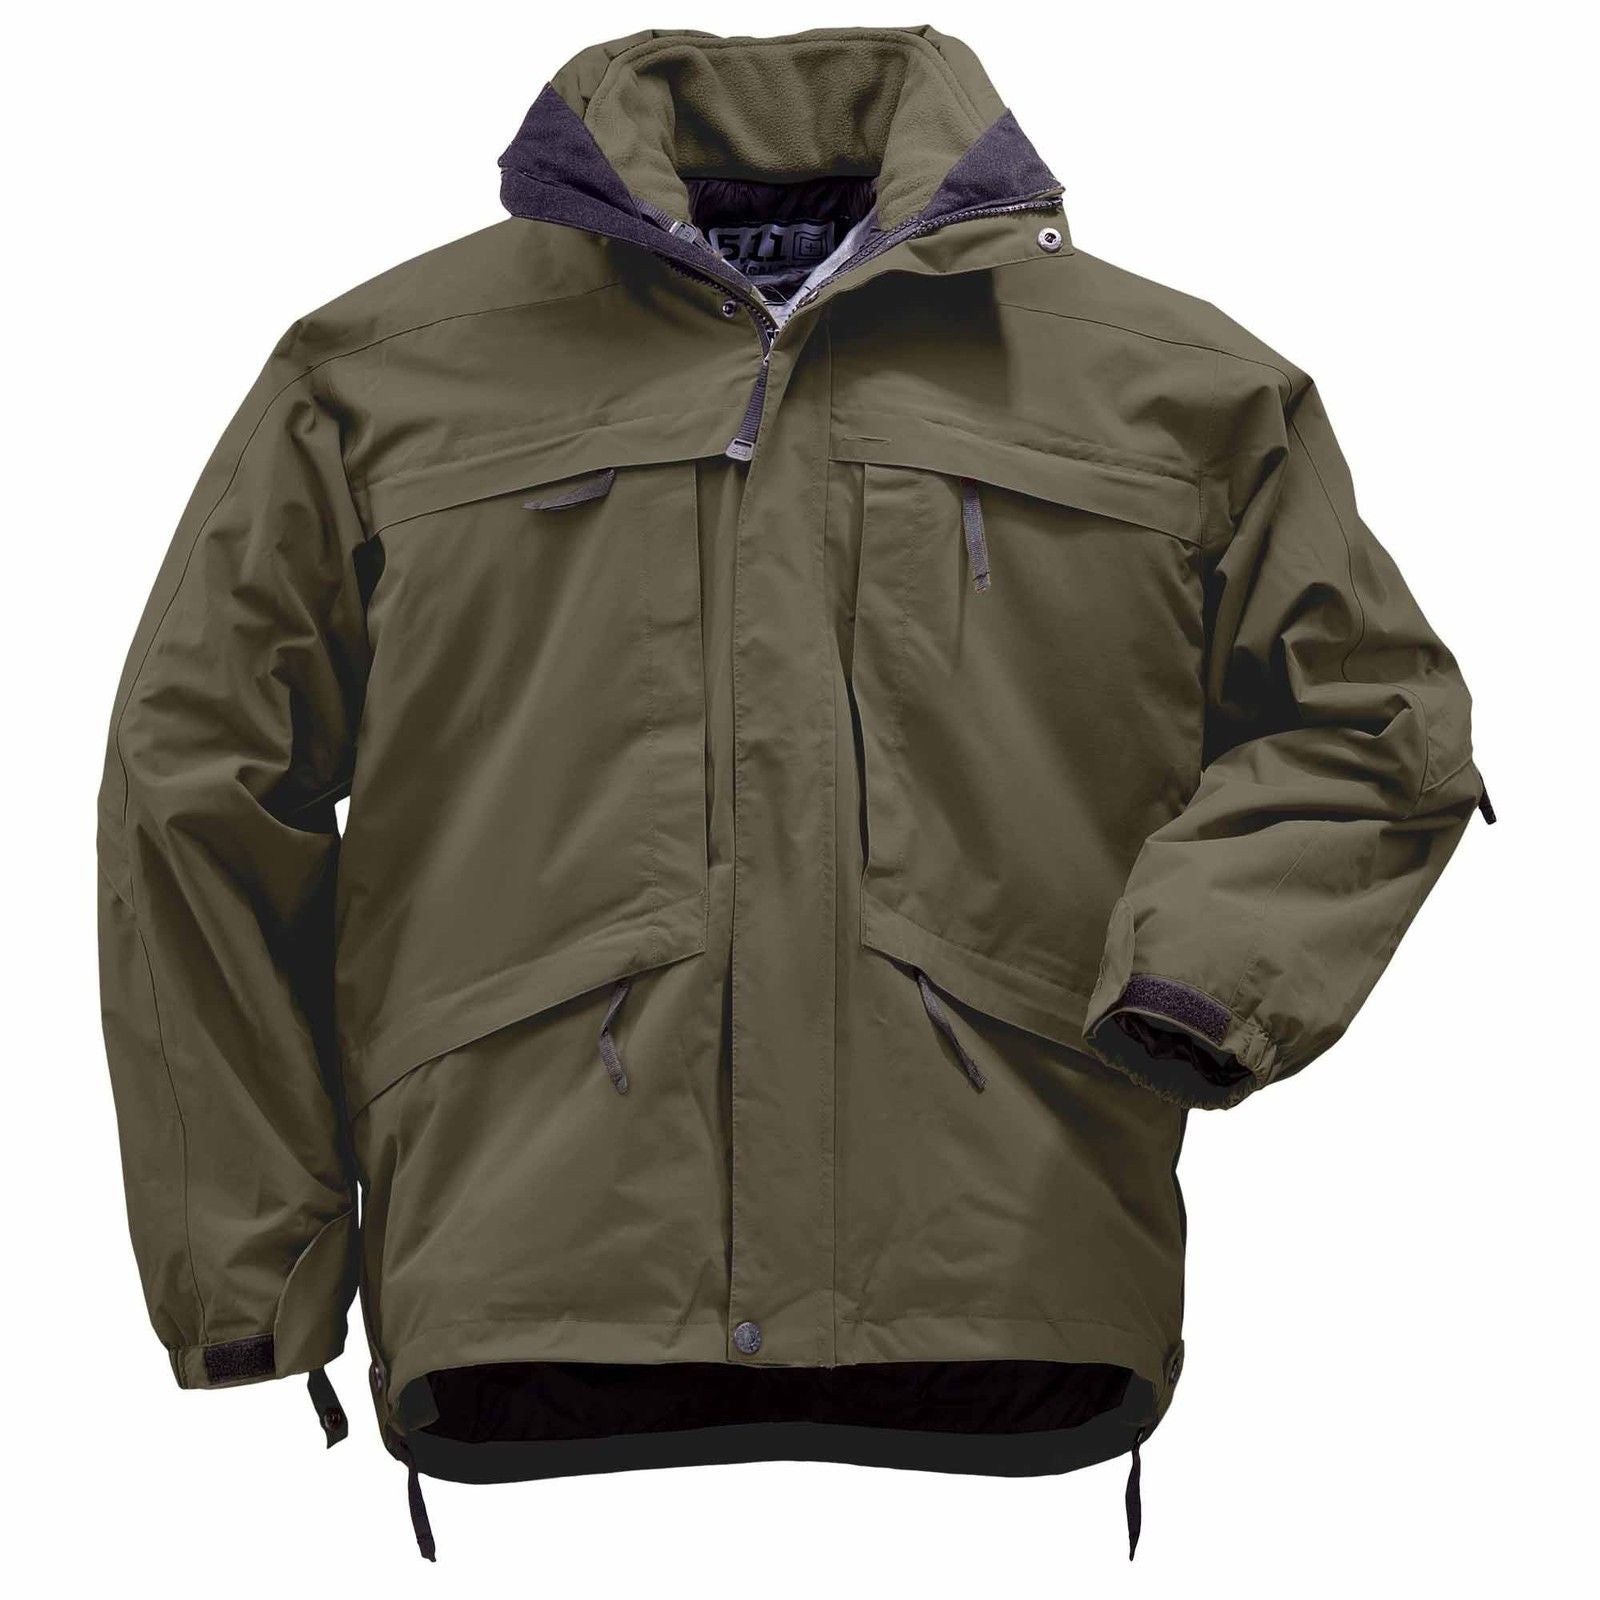 5.11 Tactical Aggressor Parka - Mens CCW Concealed Carry Fleece Lined ...